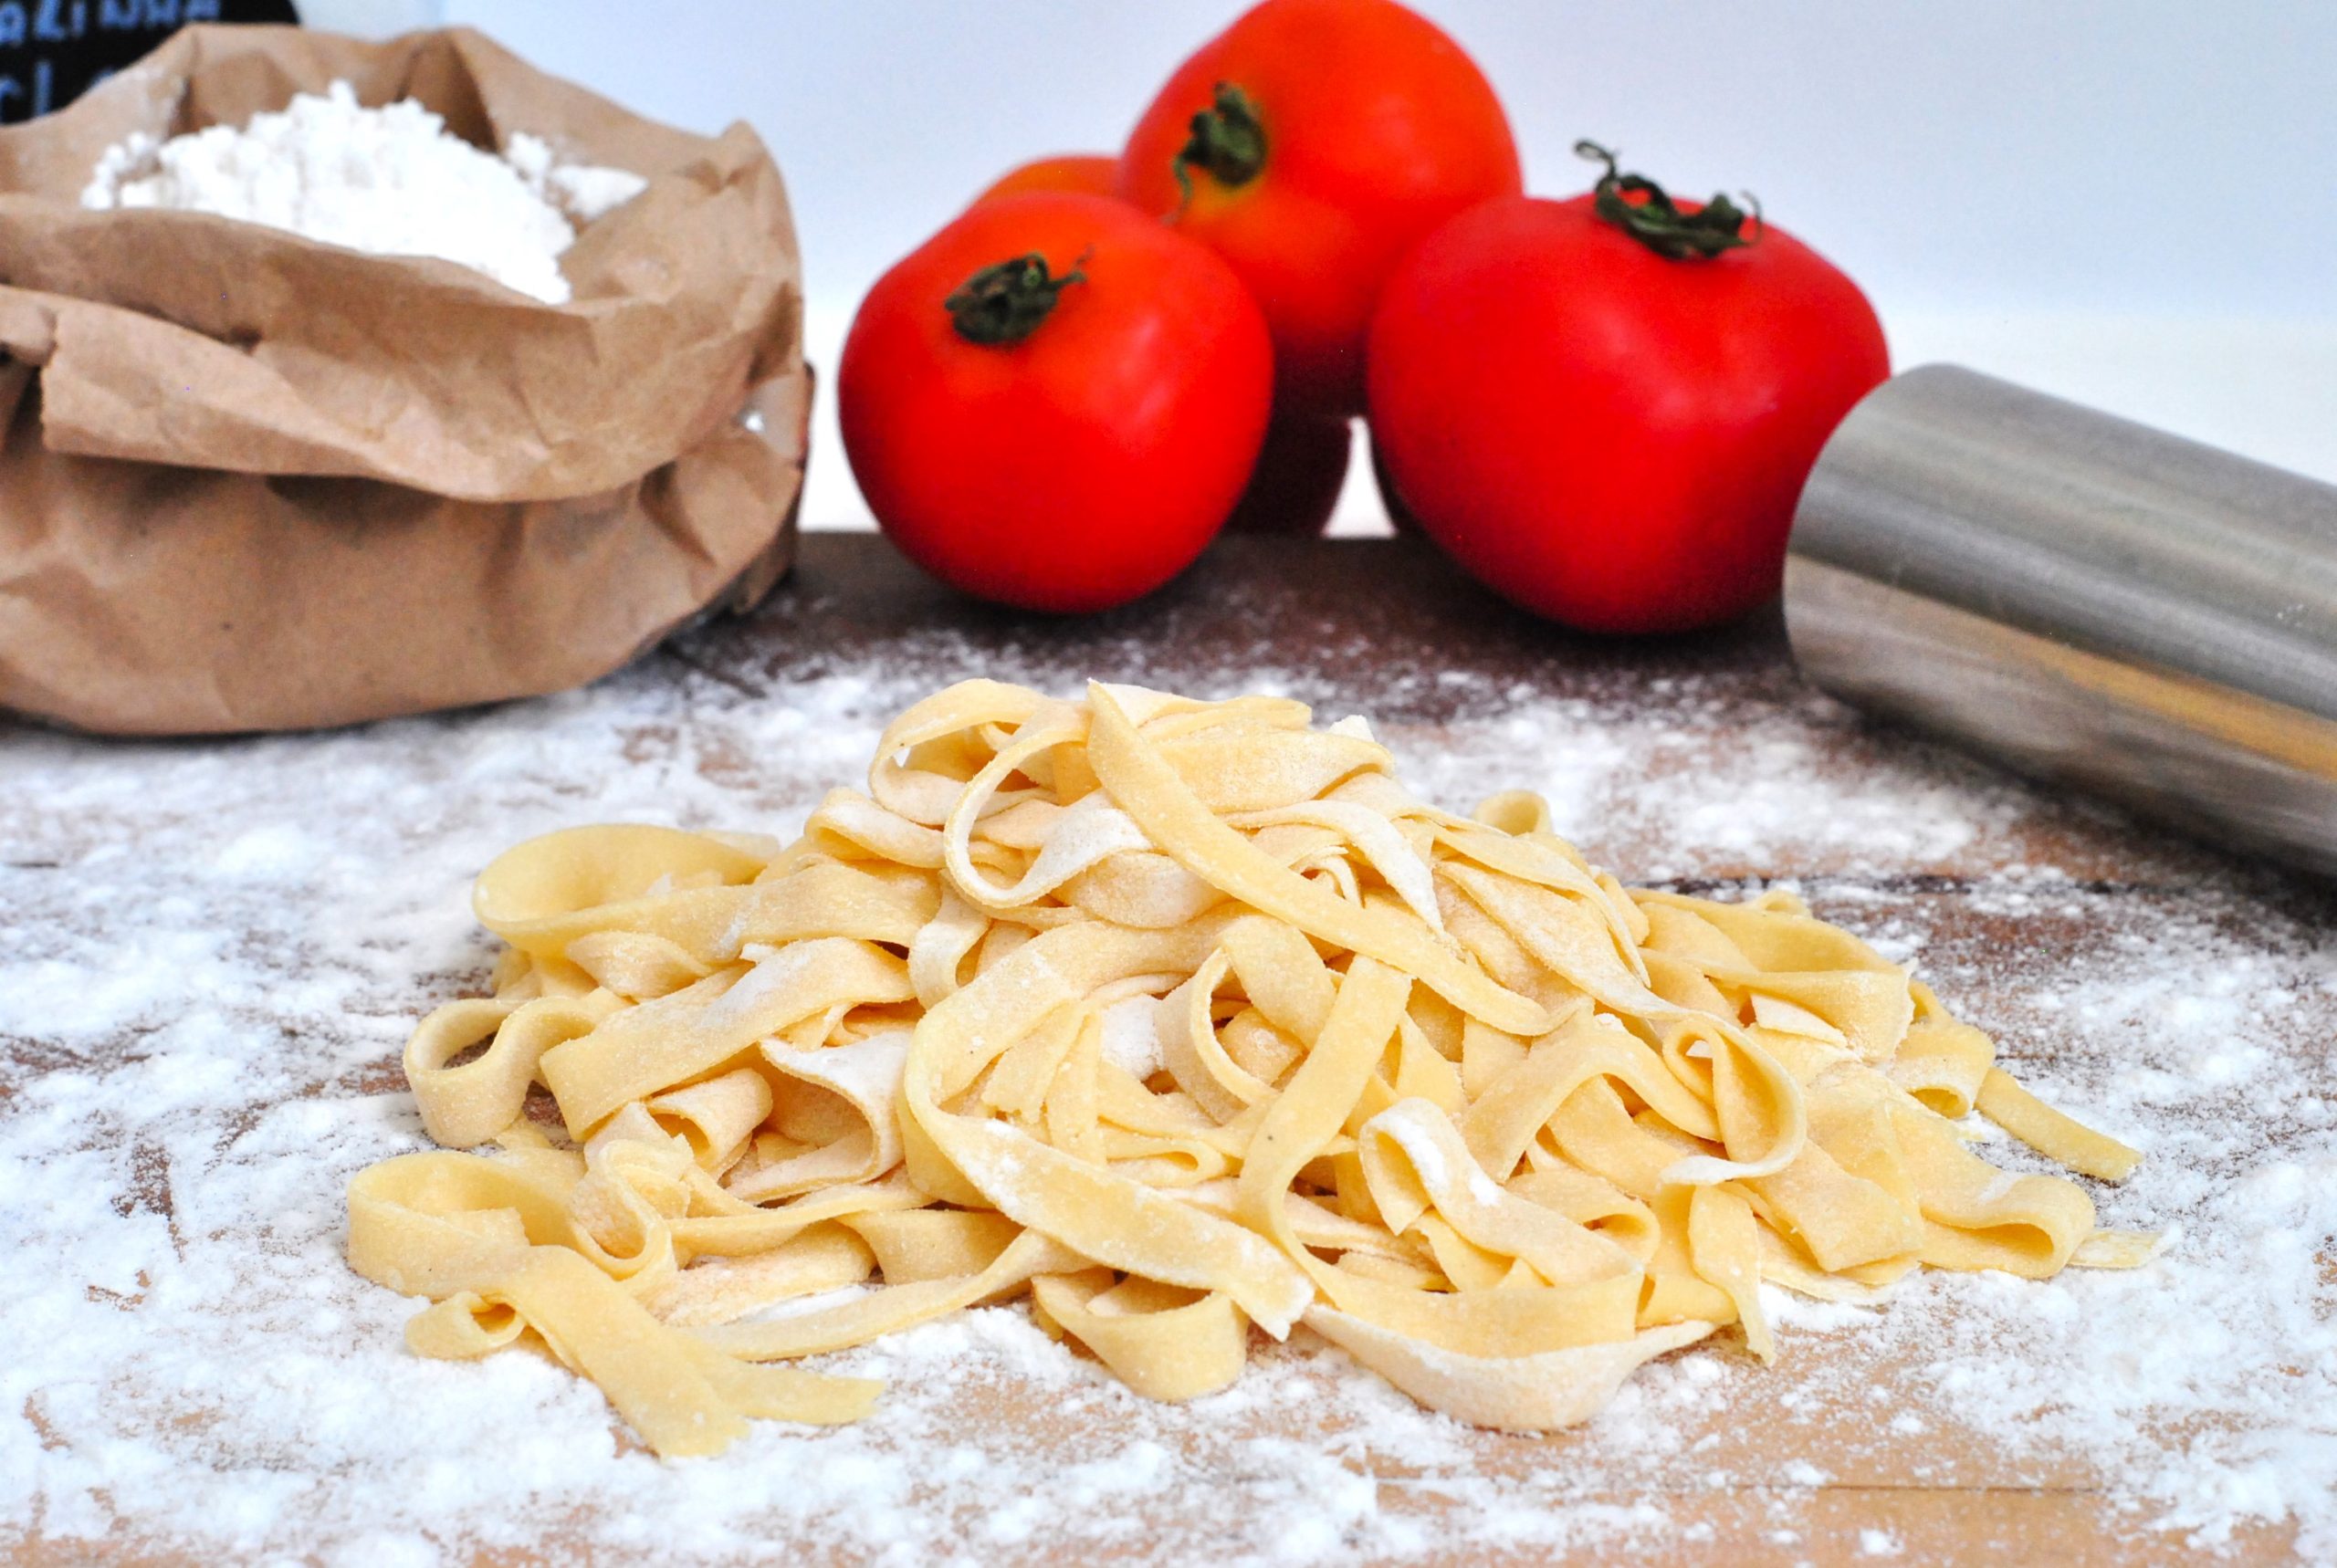 Homemade gluten-free and lactose-free pasta (no mix needed)